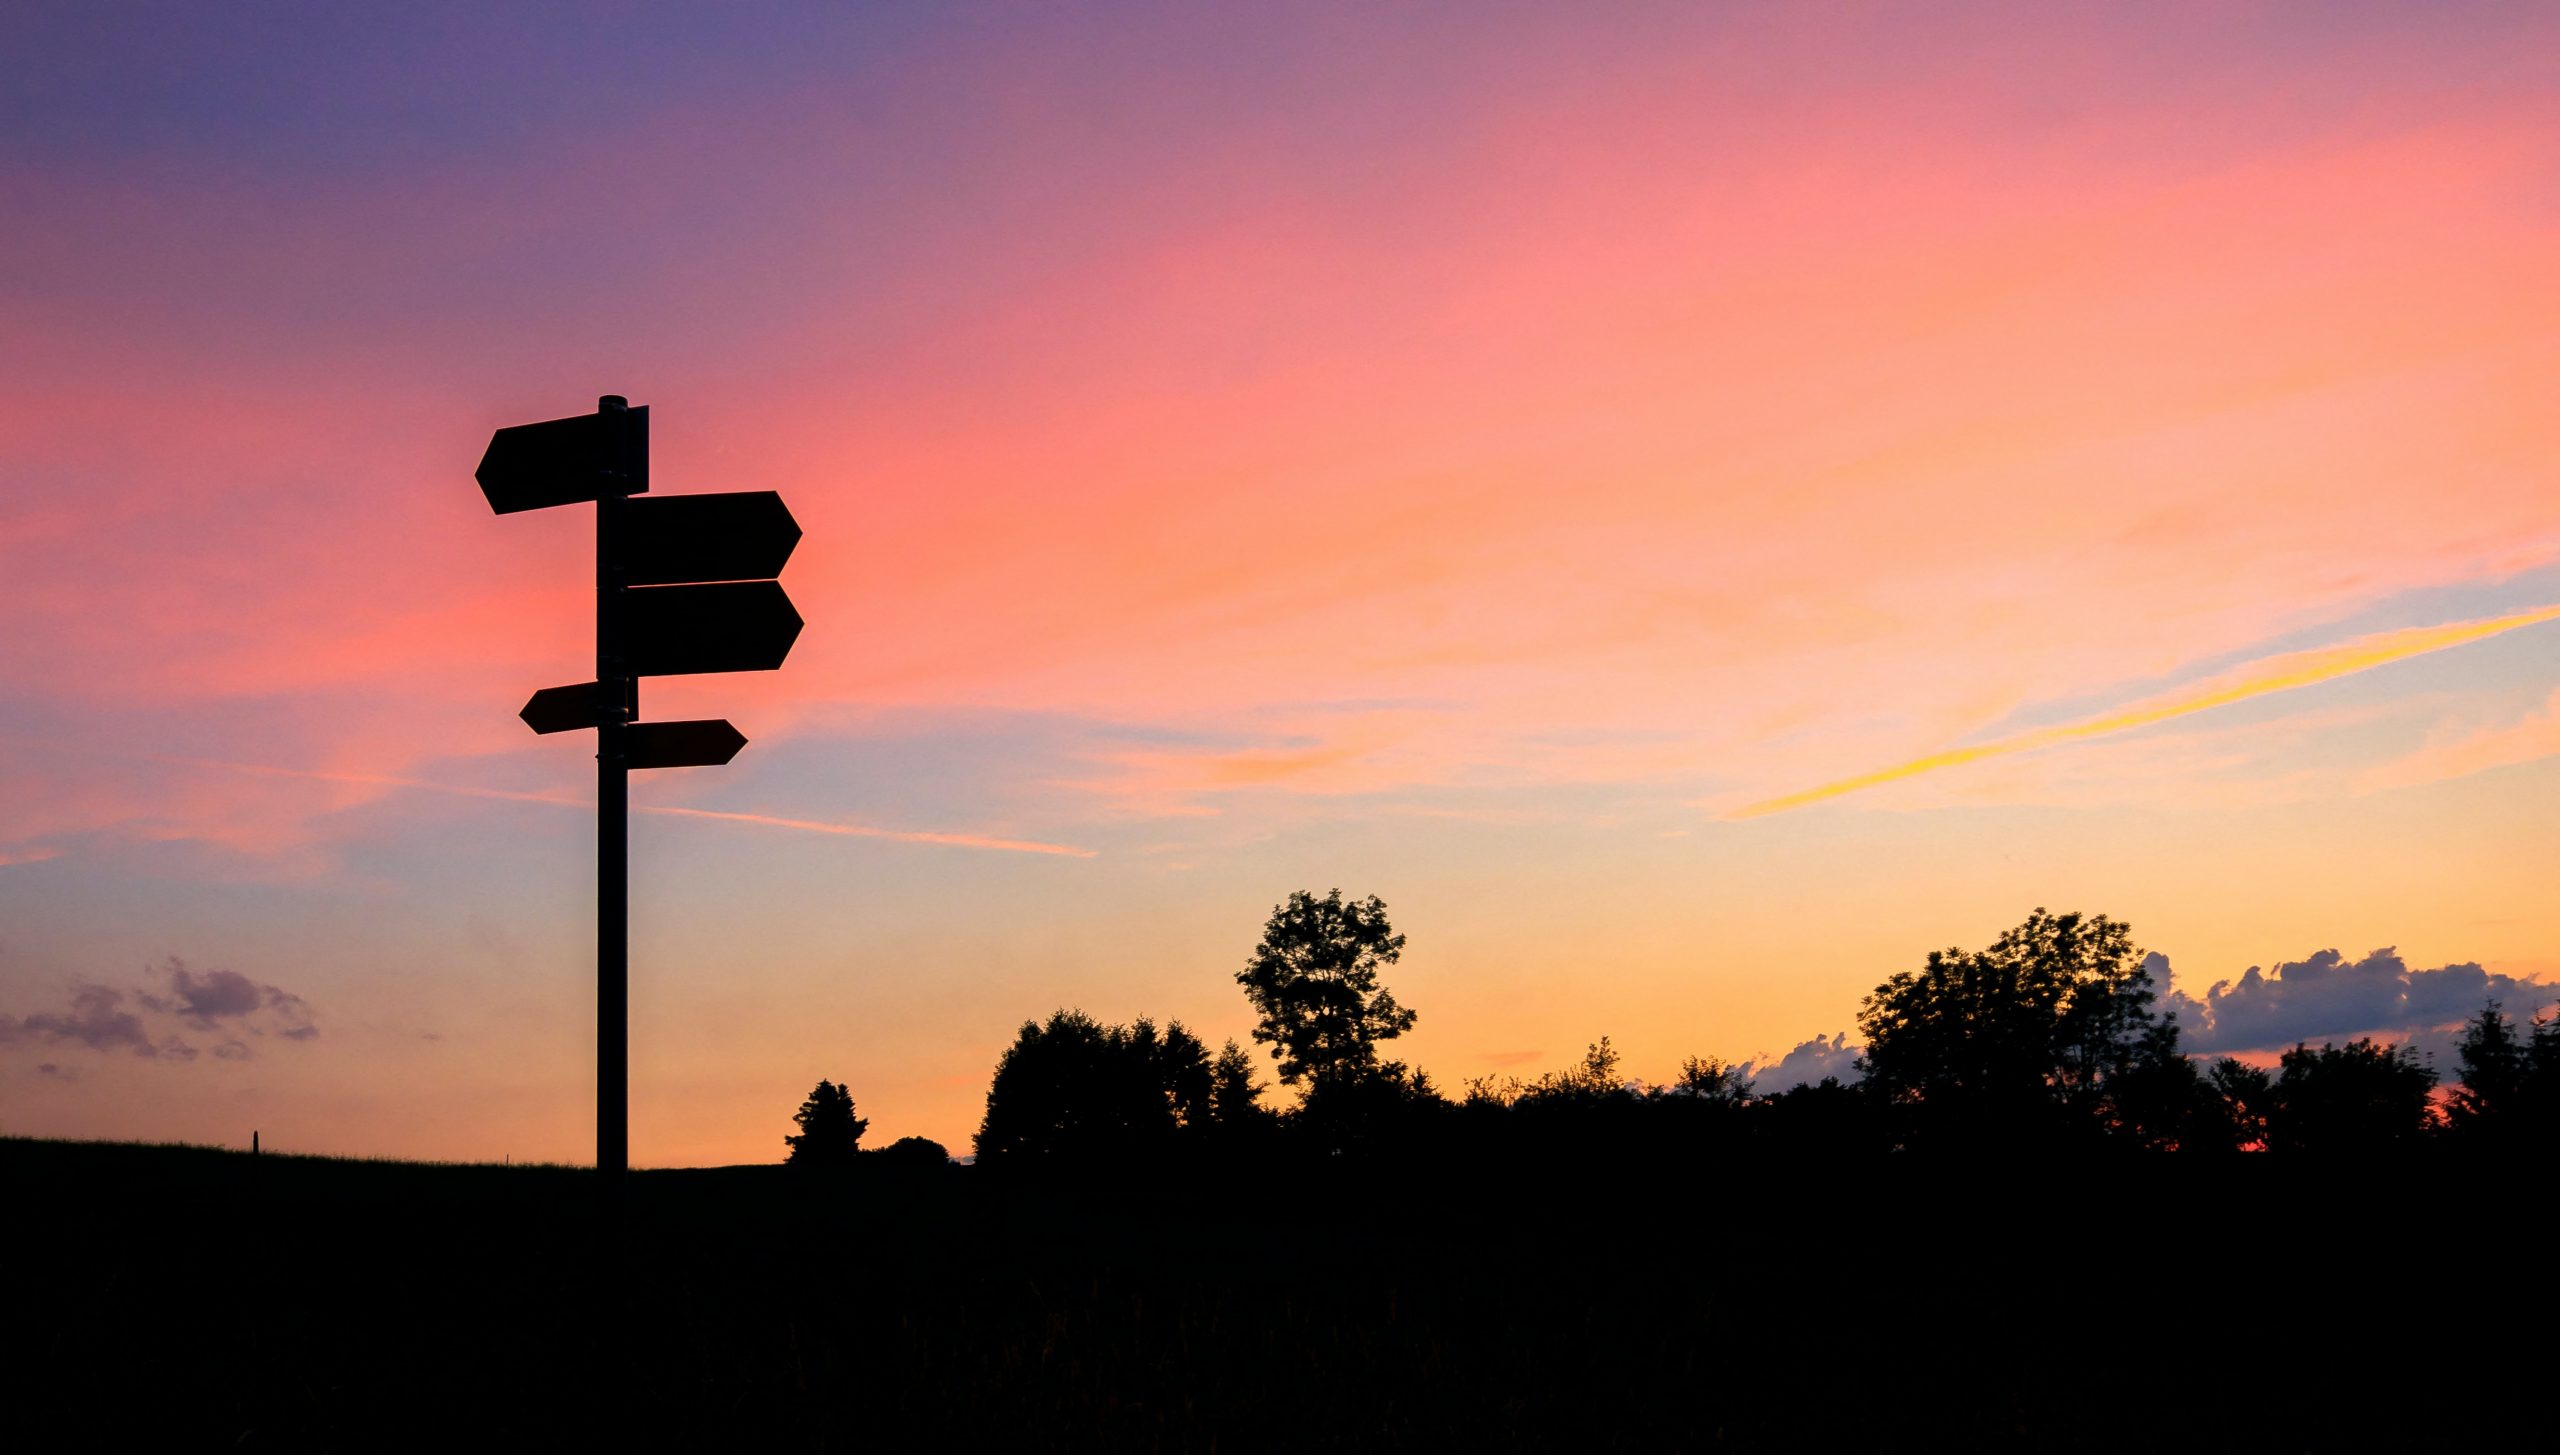 Silhouette of a signpost